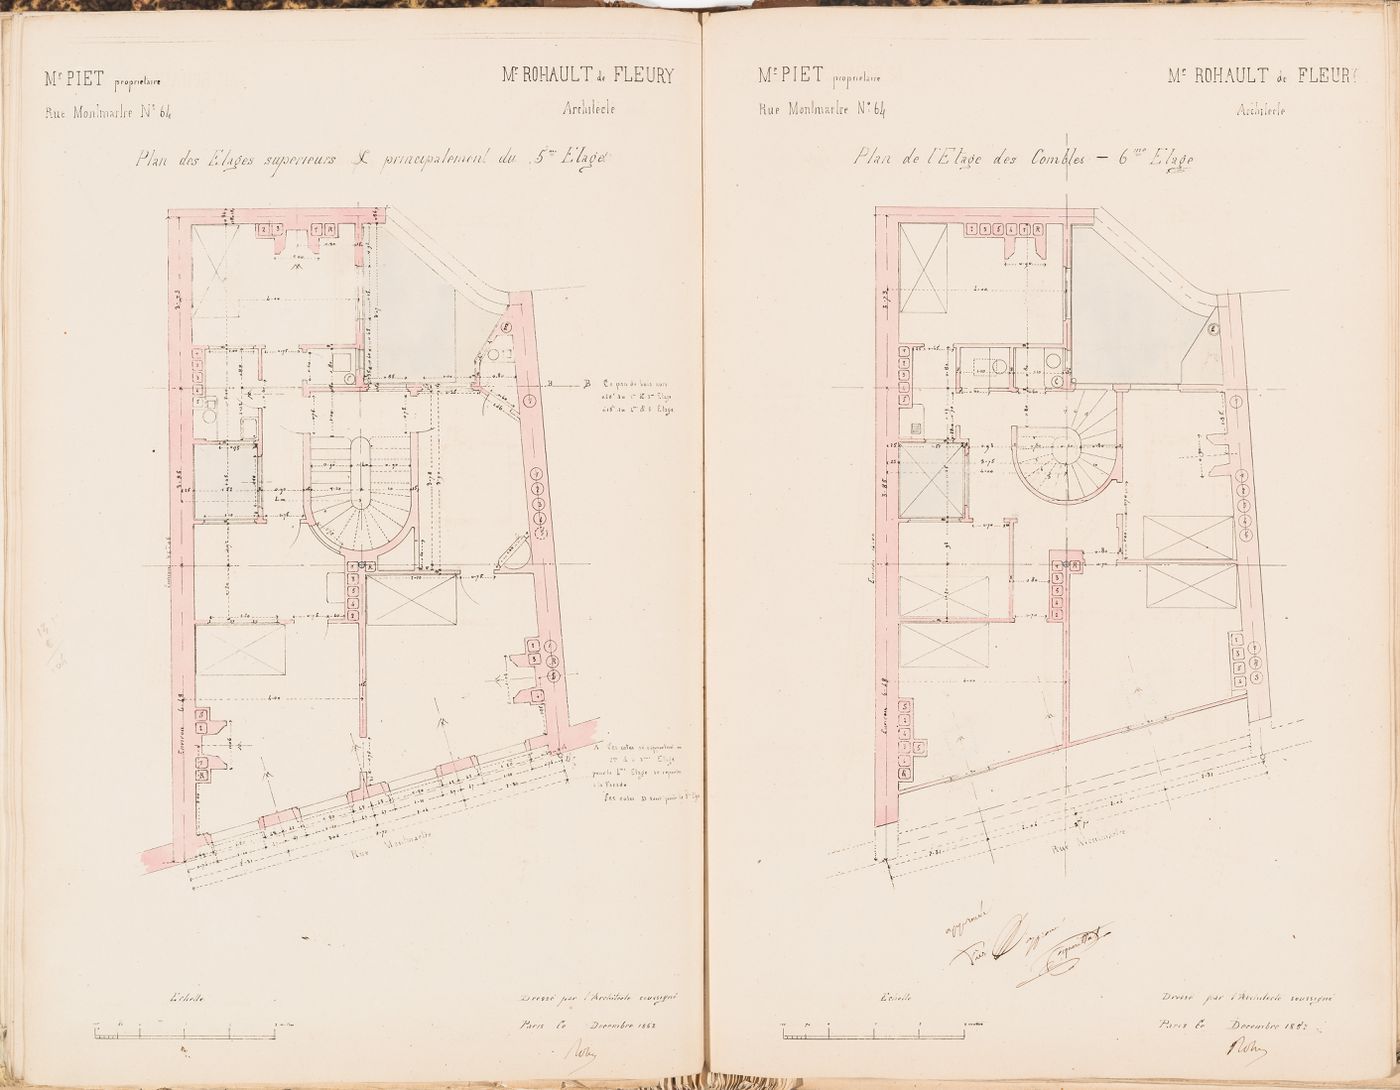 Contract drawings for an apartment house for Monsieur Piet, 64 rue Montmartre, Paris: Plan for the upper floors and plan for the "combles"